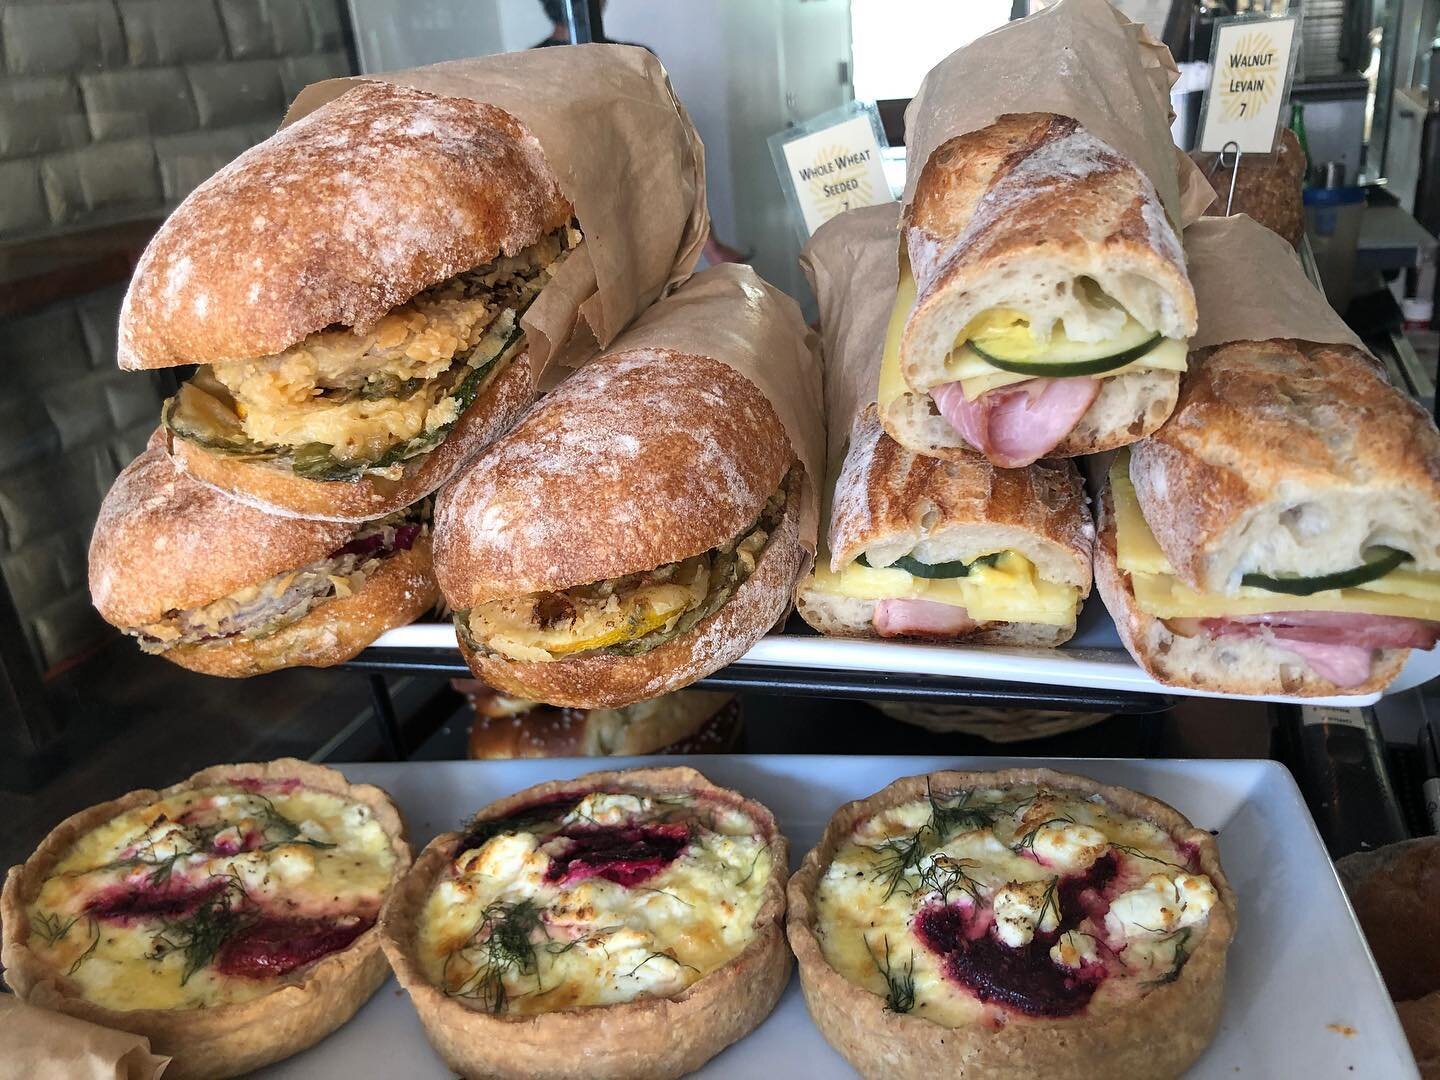 Shop for your picnic yet? Order for dinner? Fresh grab and go sandwiches and seasonal quiche available while supplies last. You can also order from our prepared to order hot menu of sandwiches, fried chicken and more - check out the complete menu onl